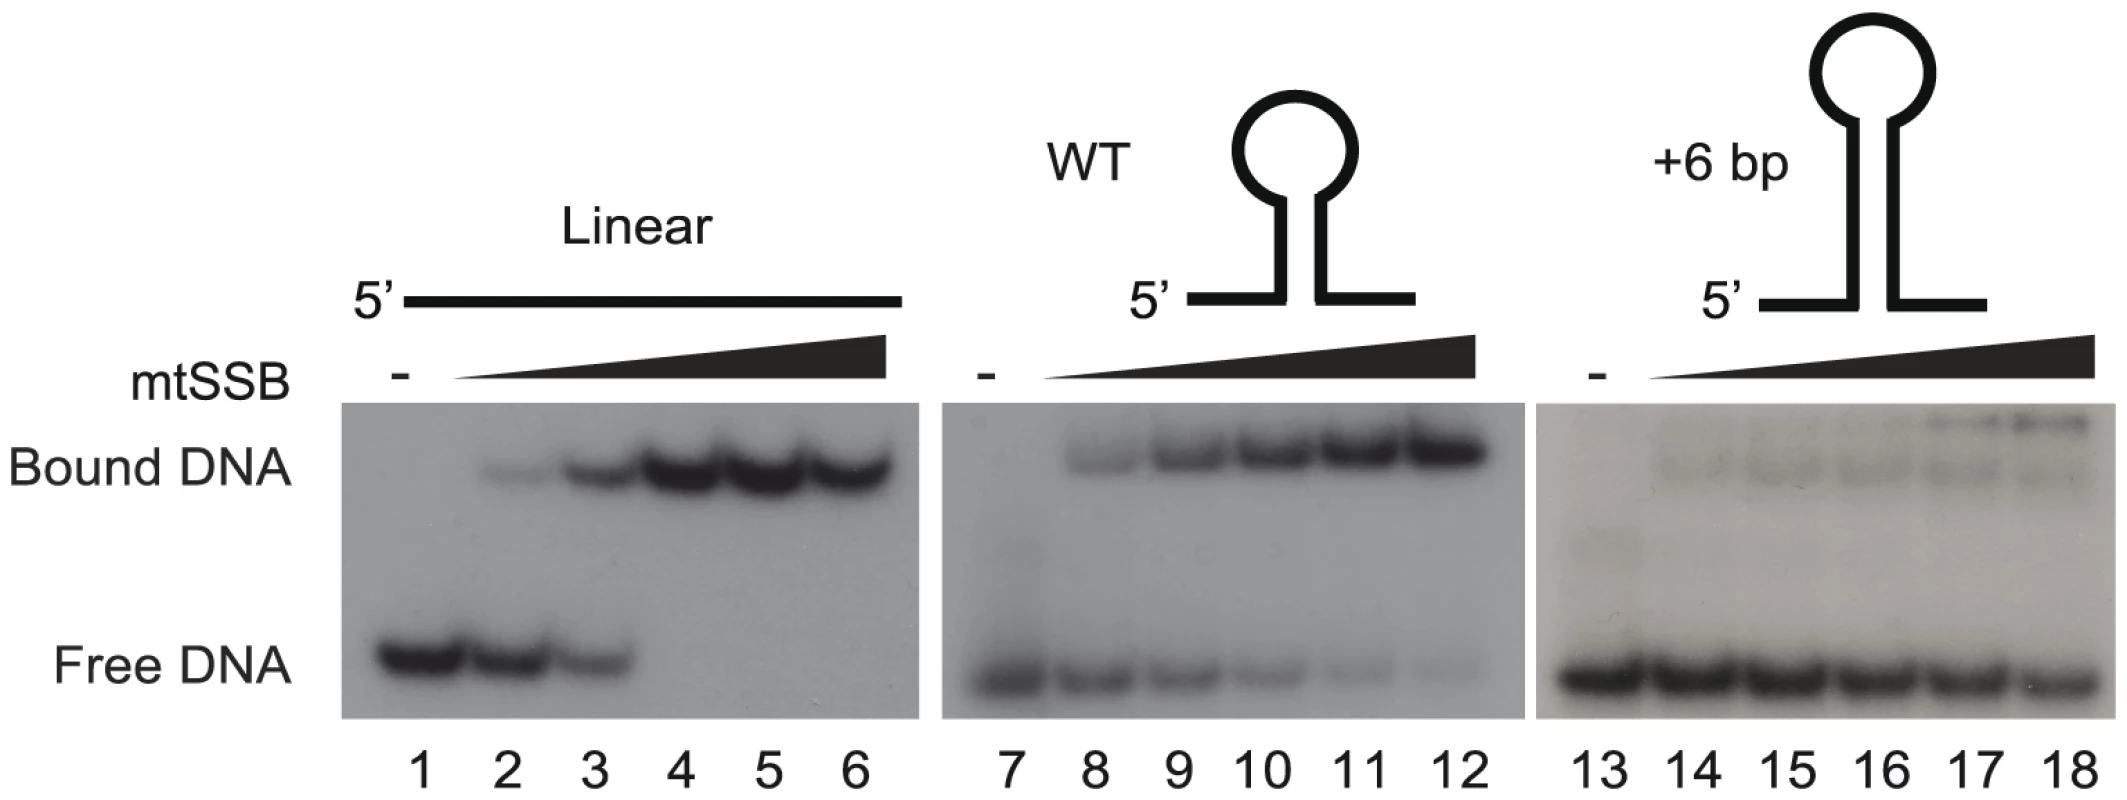 The stem-loop structure of OriL prevents mtSSB binding.